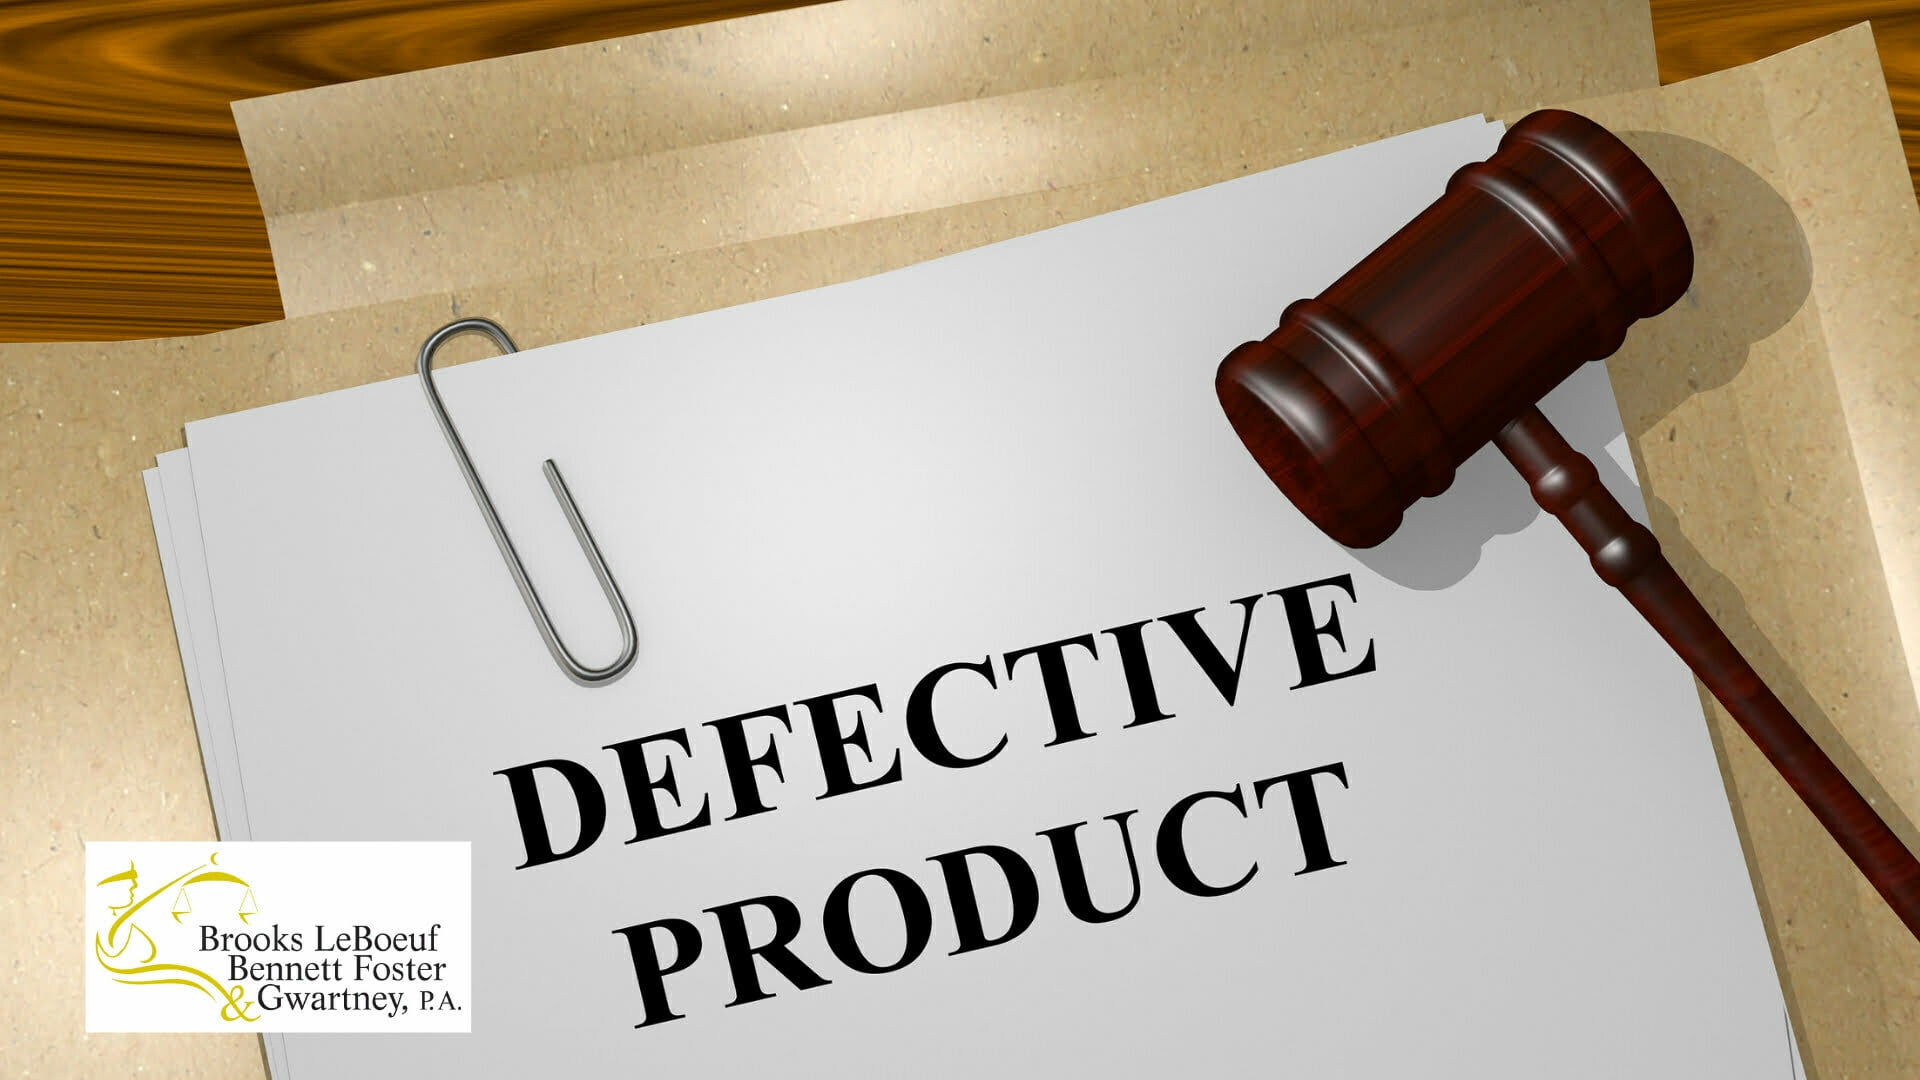 Ways You Can Protect Yourself from Dangerous Product Defects